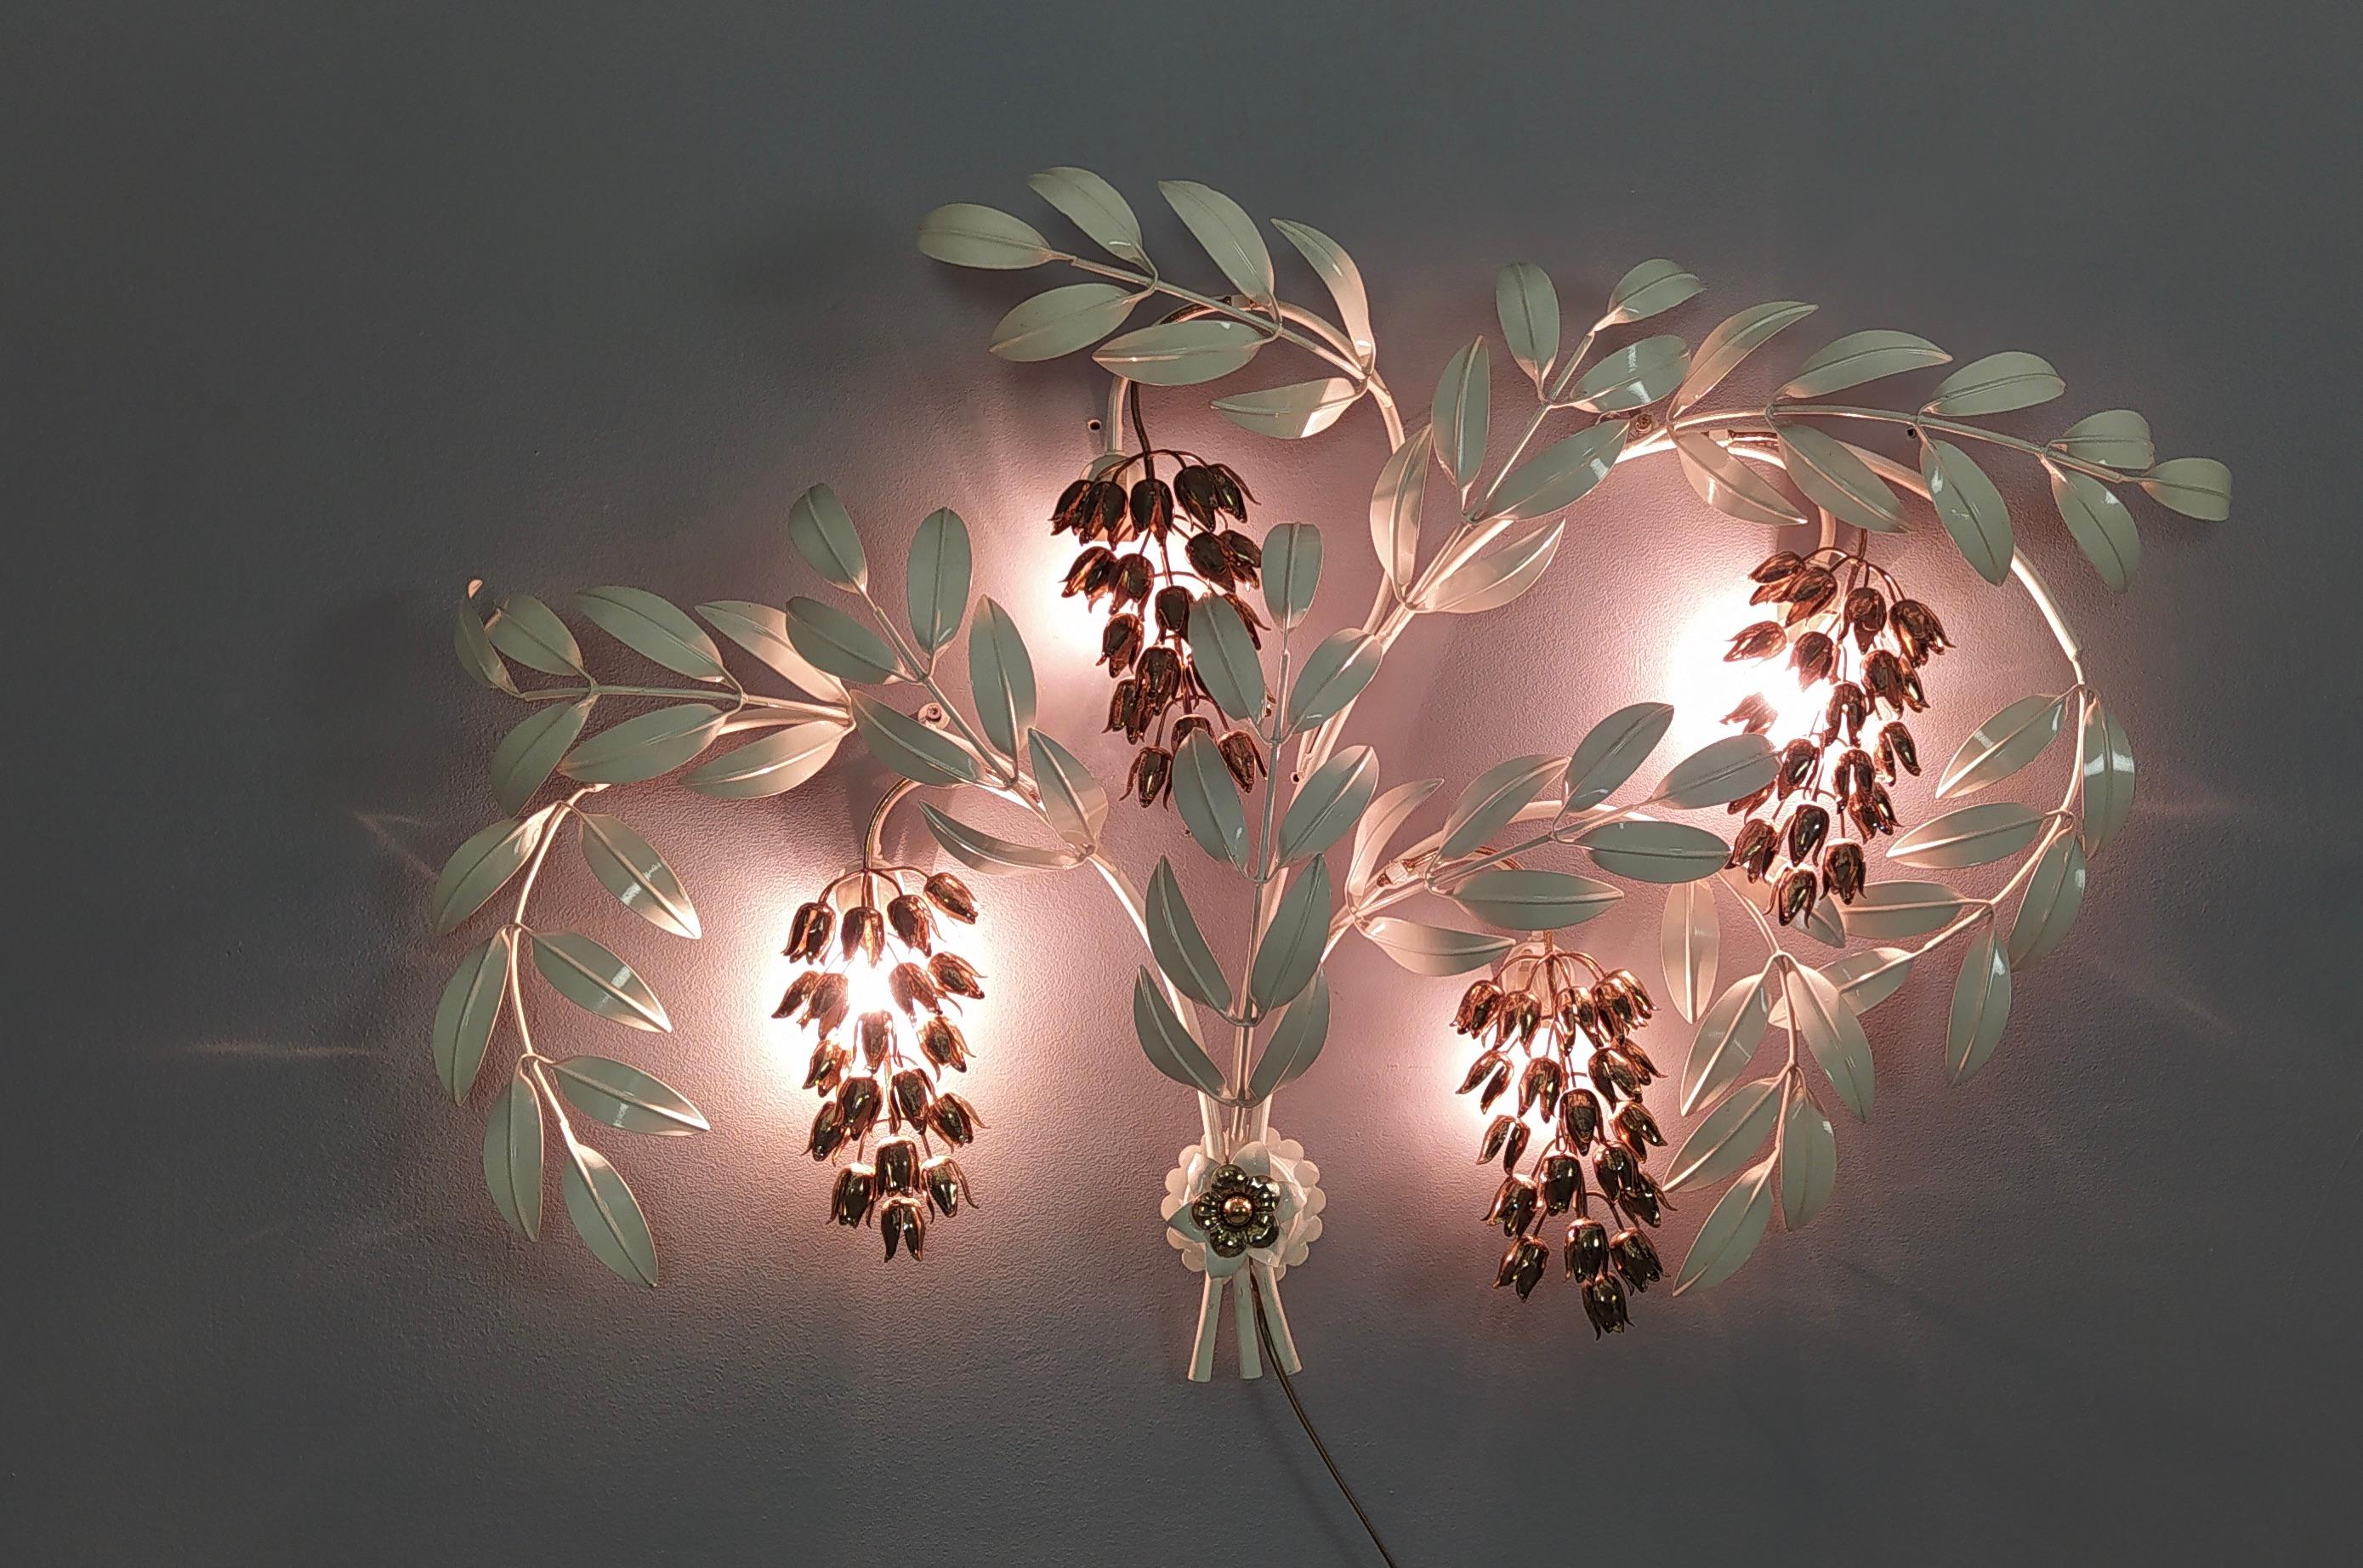 This is a very large sconce in leaf and flower form that is made in lacquered metal and brass.
This decorative sconce makes an ideal feature piece for a traditional or contemporary interior, perhaps over a sofa, fireplace, bed or any wall.
The